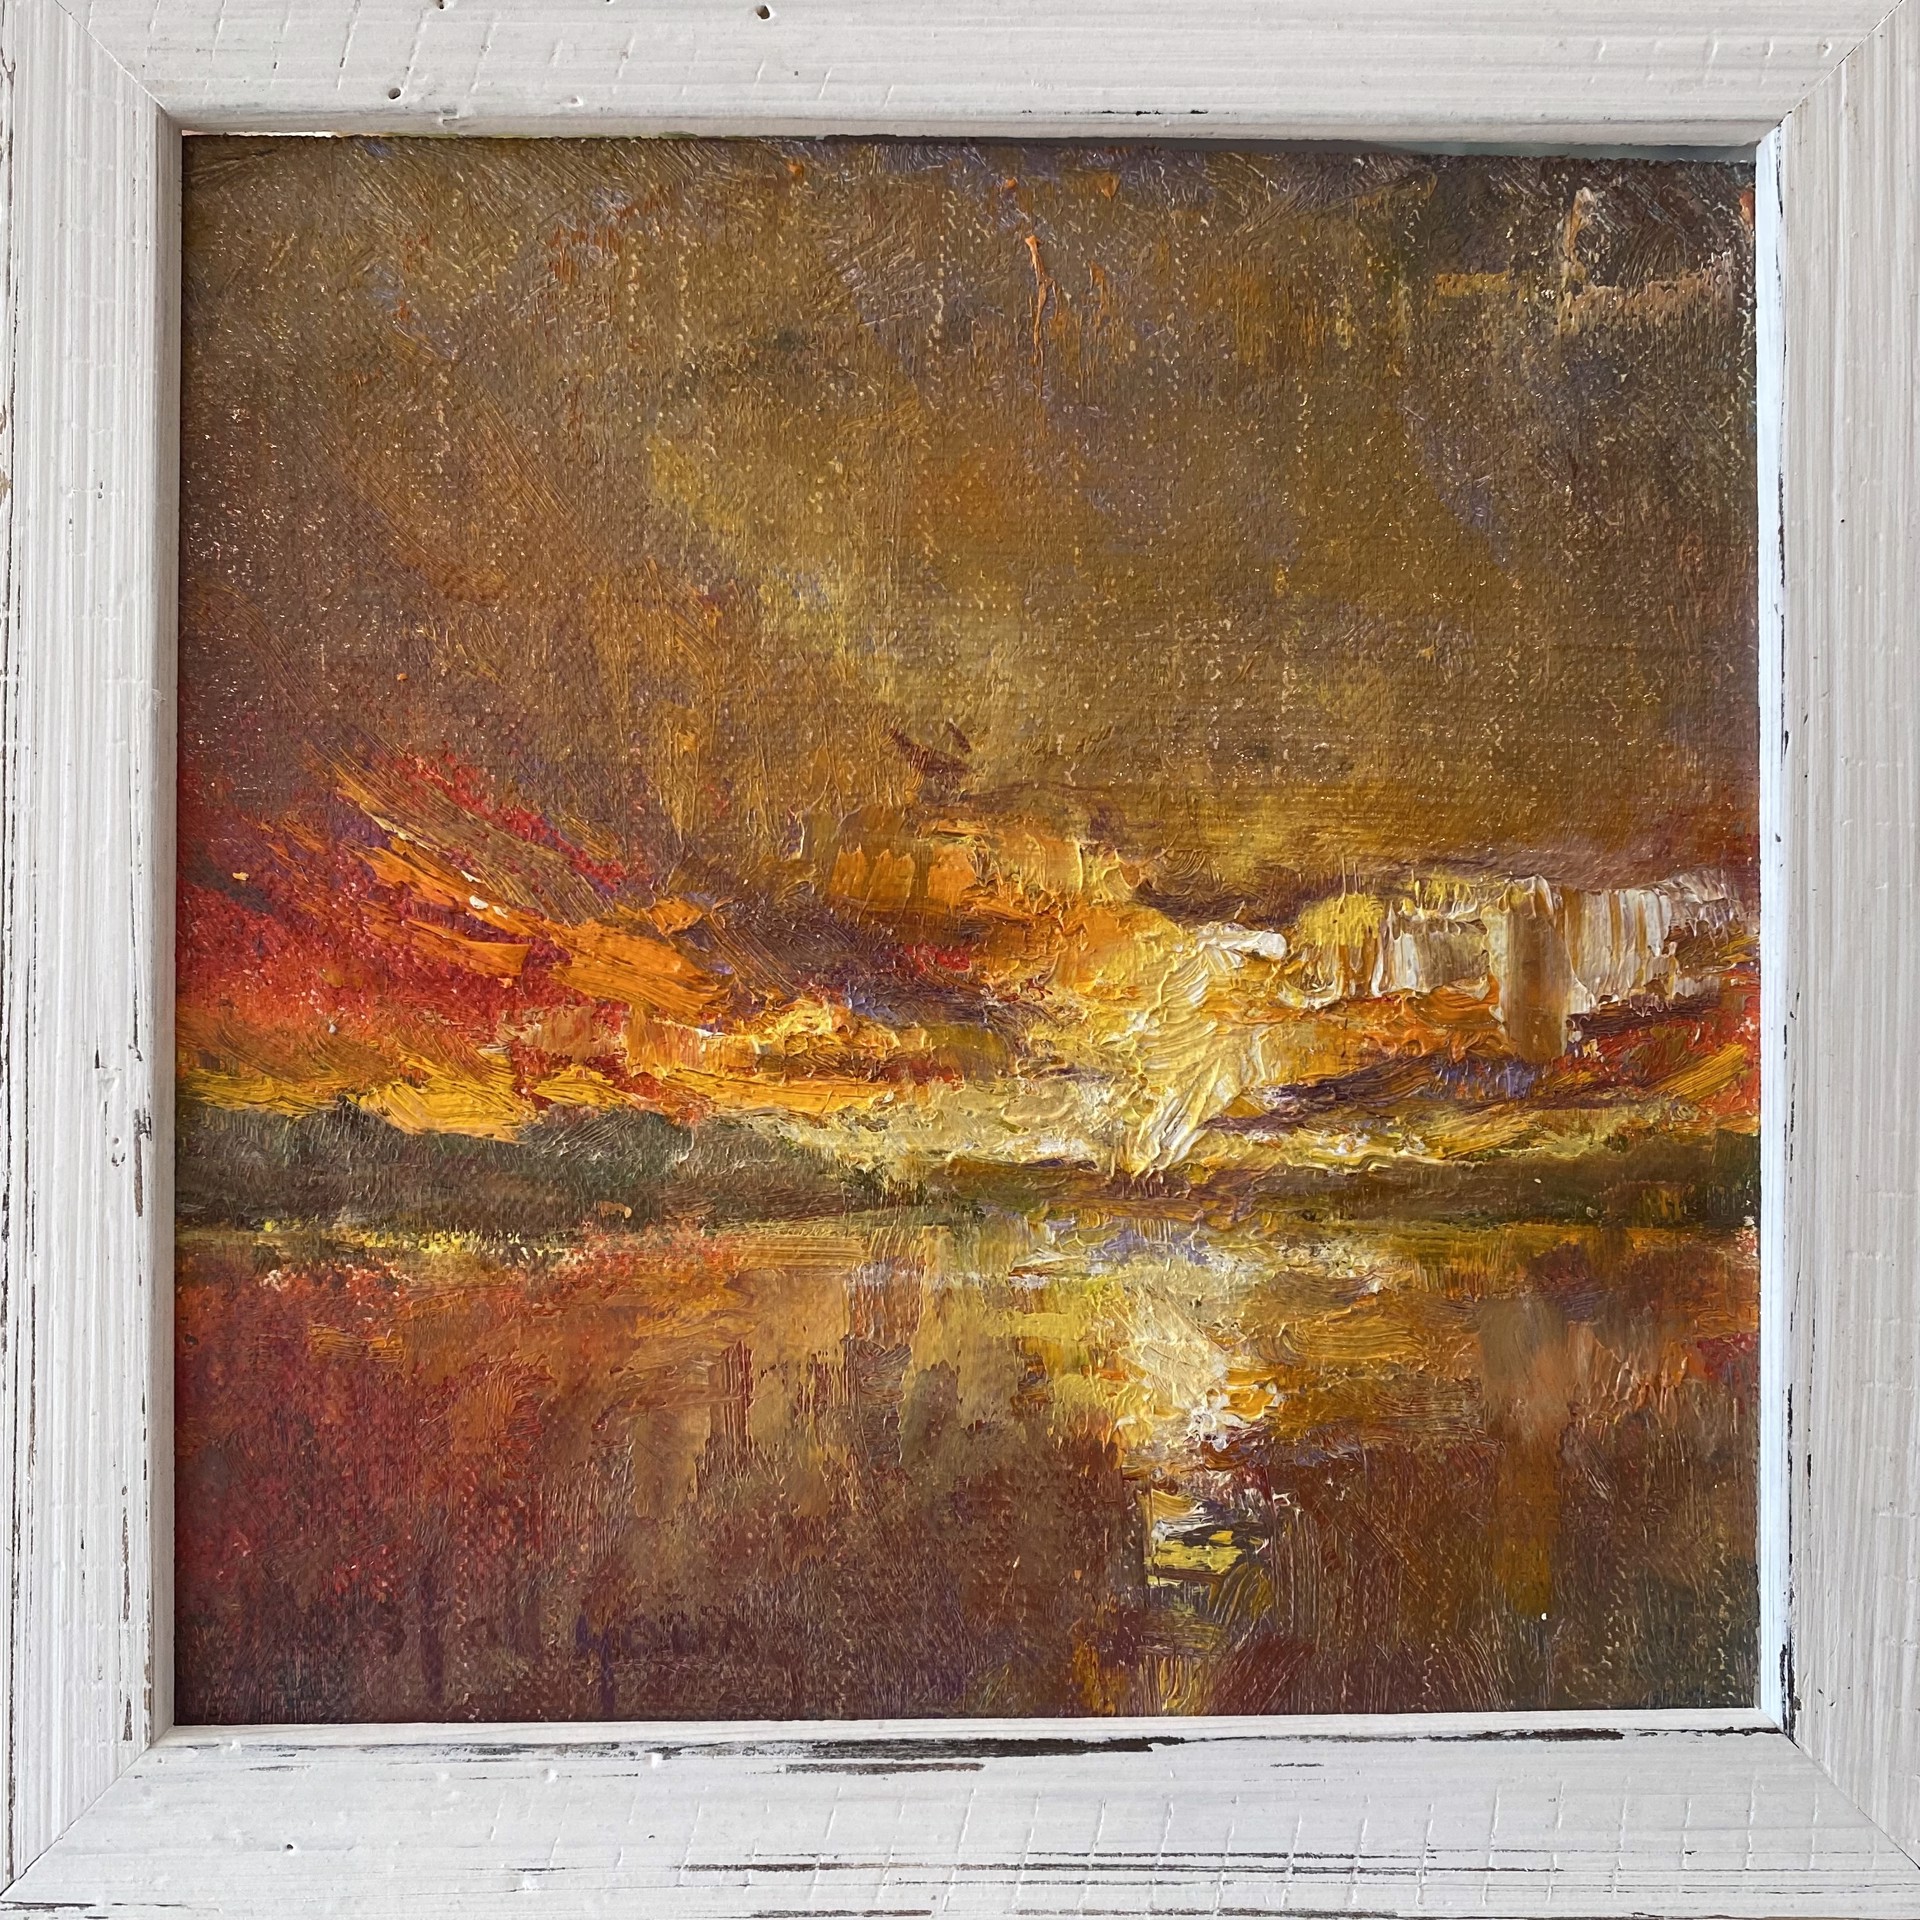 Orange Sunset (L601) by Joan Horsfall Young